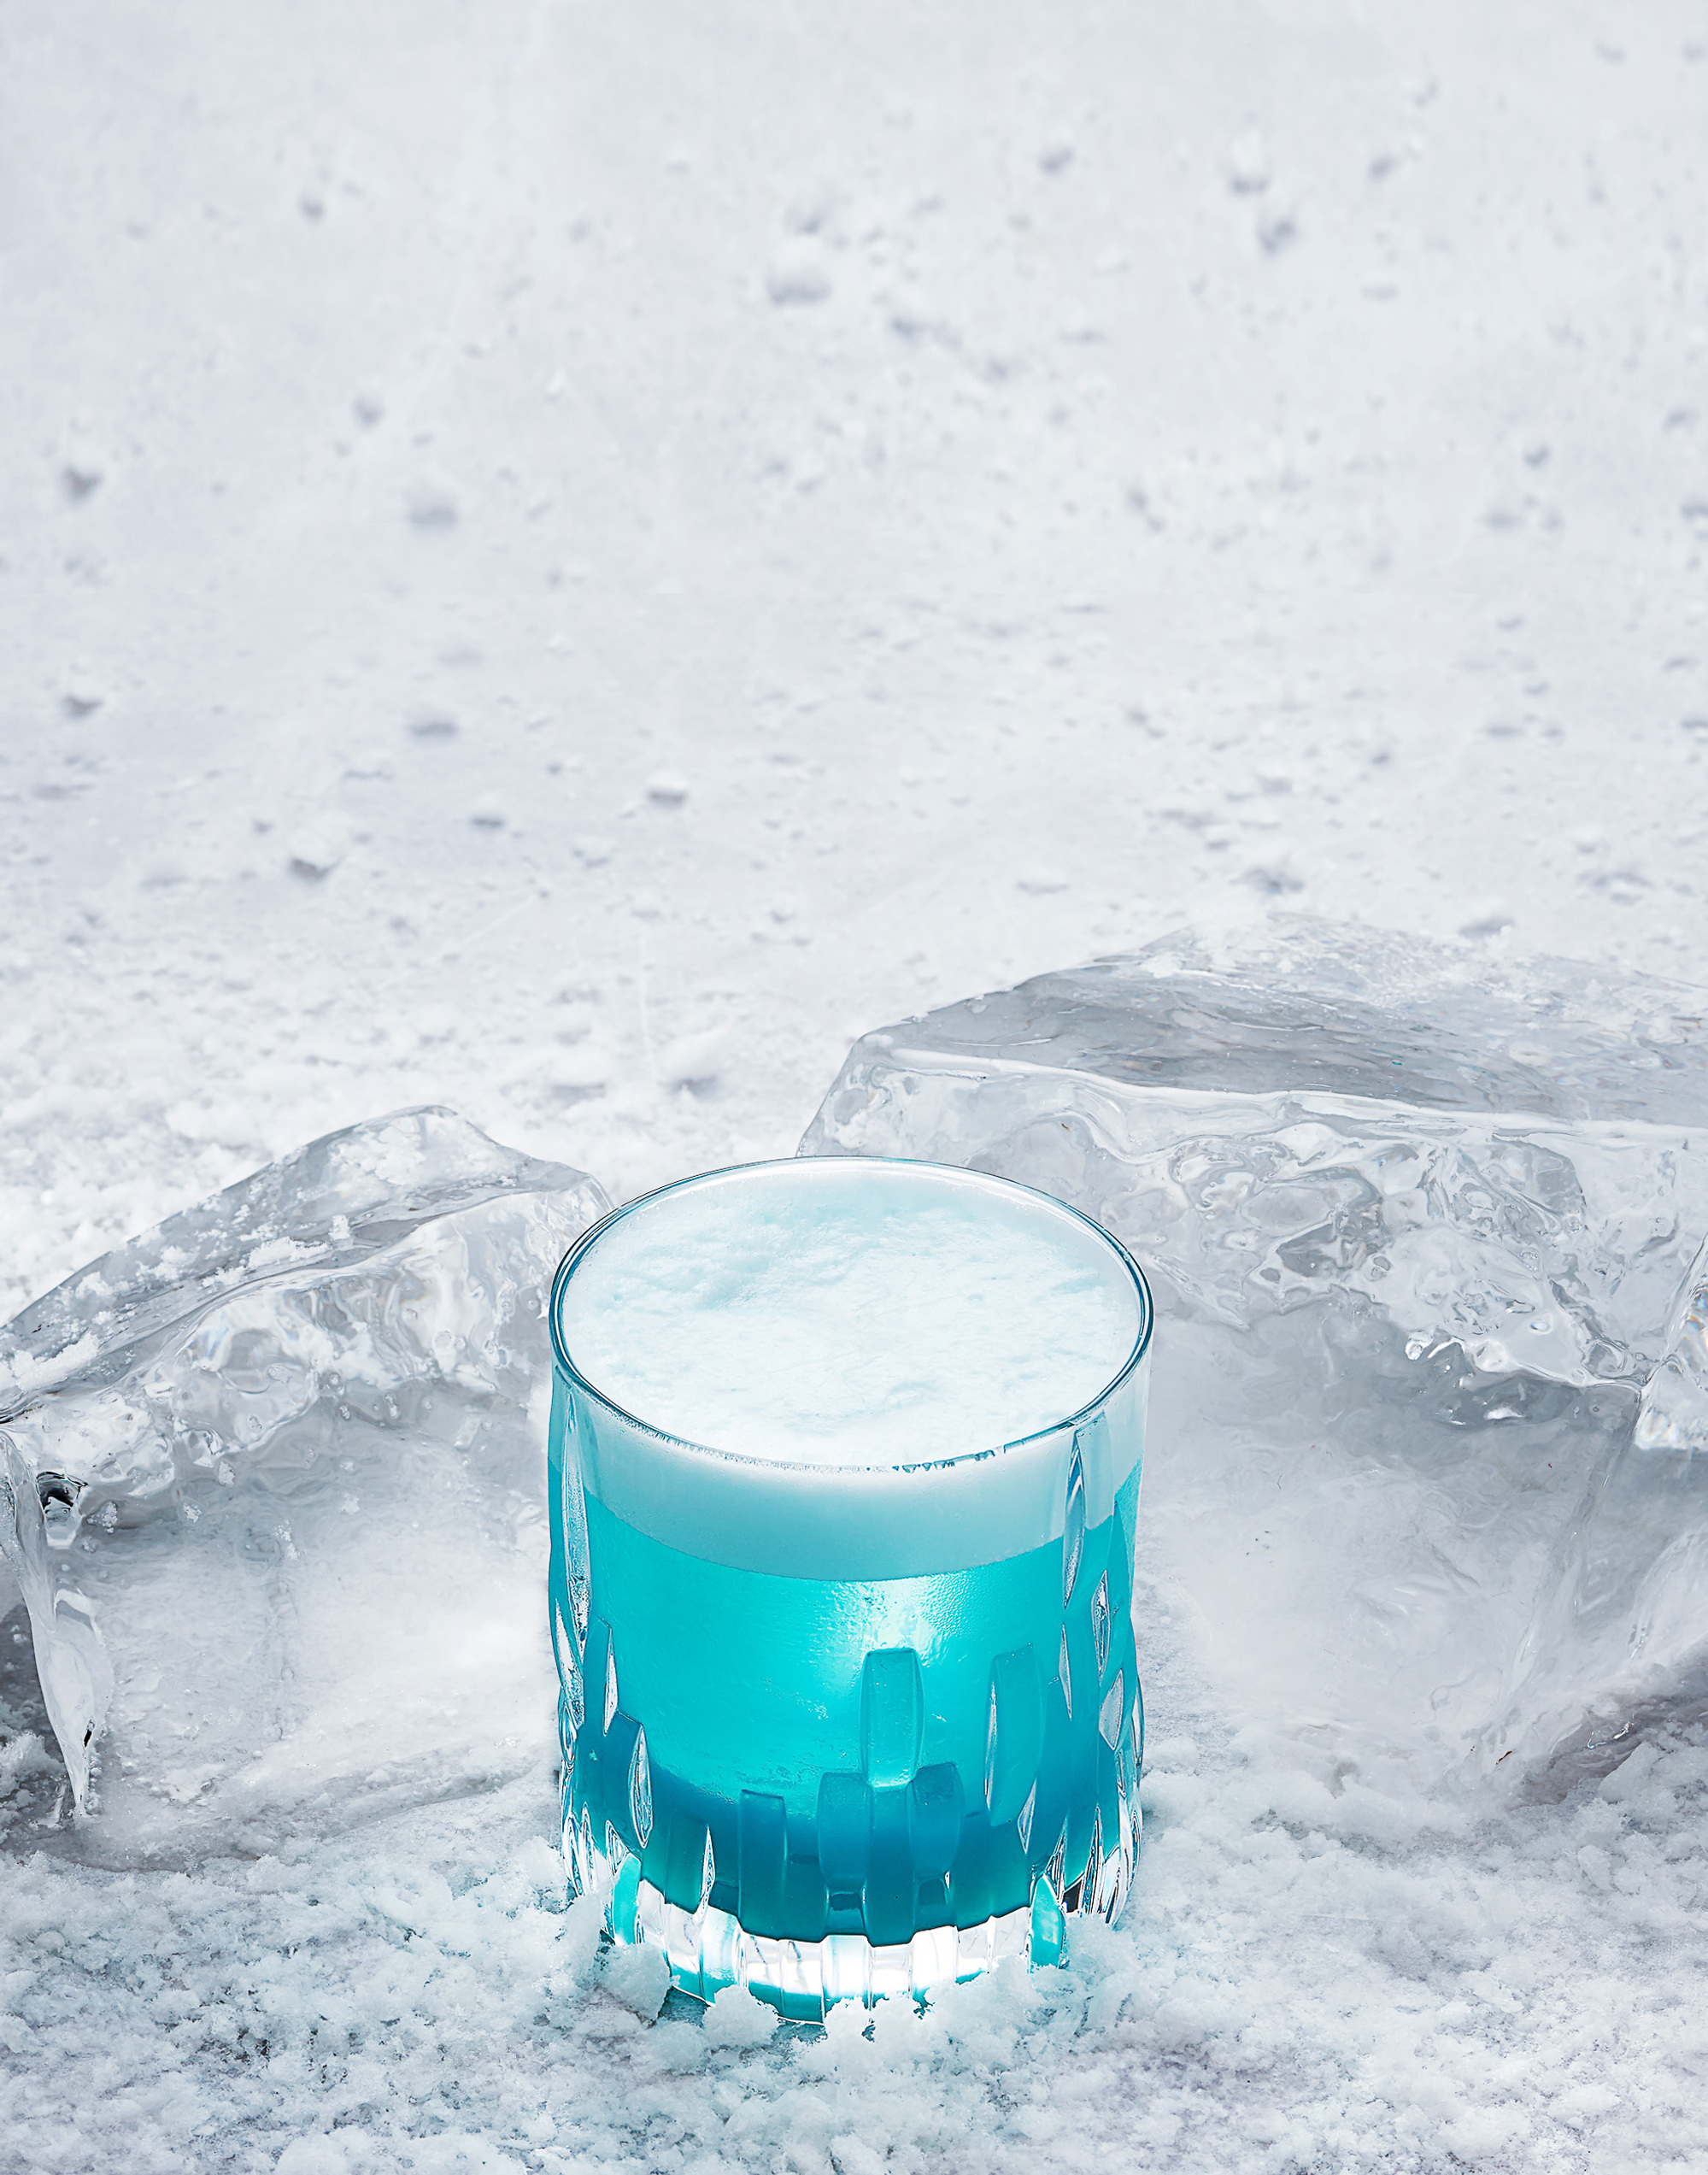 Johnnie Walker White Walker cocktail by beverage photographer Timothy Hogan. 

Beverages and alcohol product & advertising photography by Timothy Hogan Studio in Los Angeles